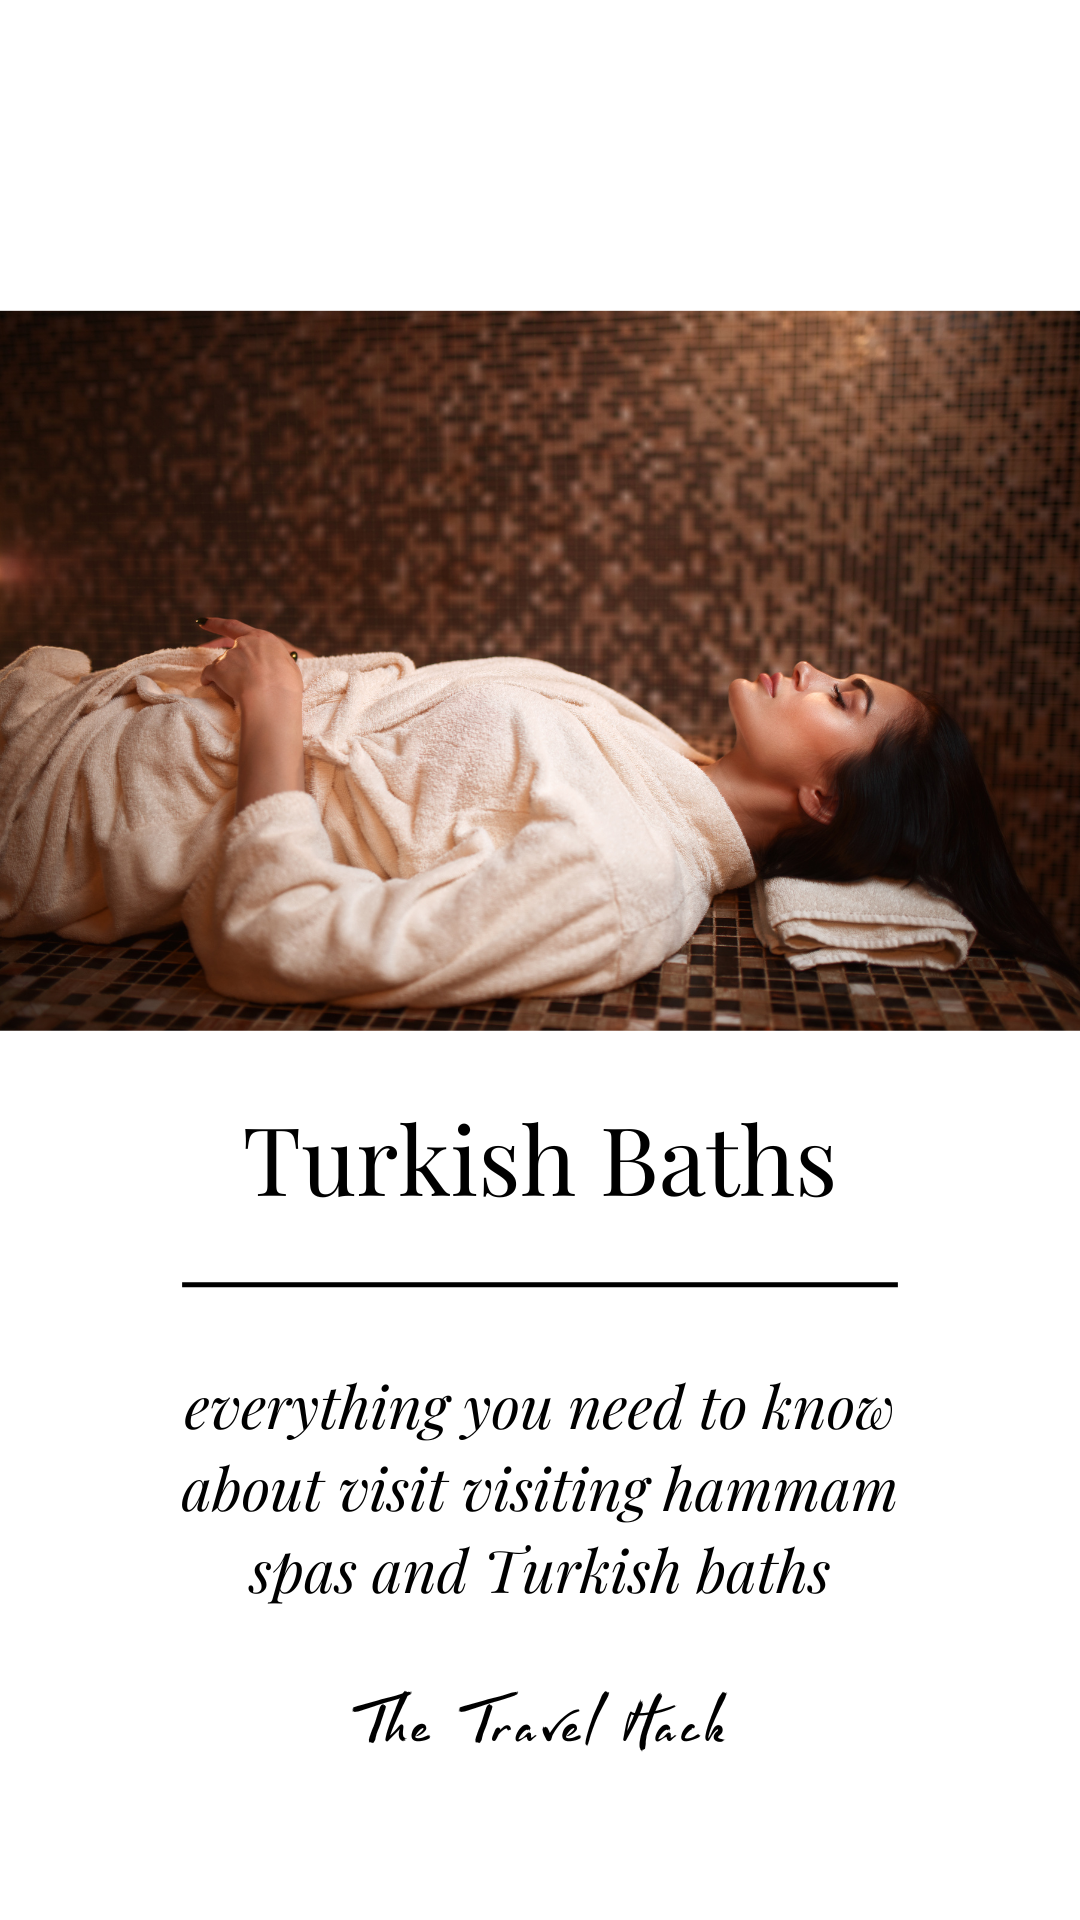 Everything you should know about Hammam Spas and Turkish Baths